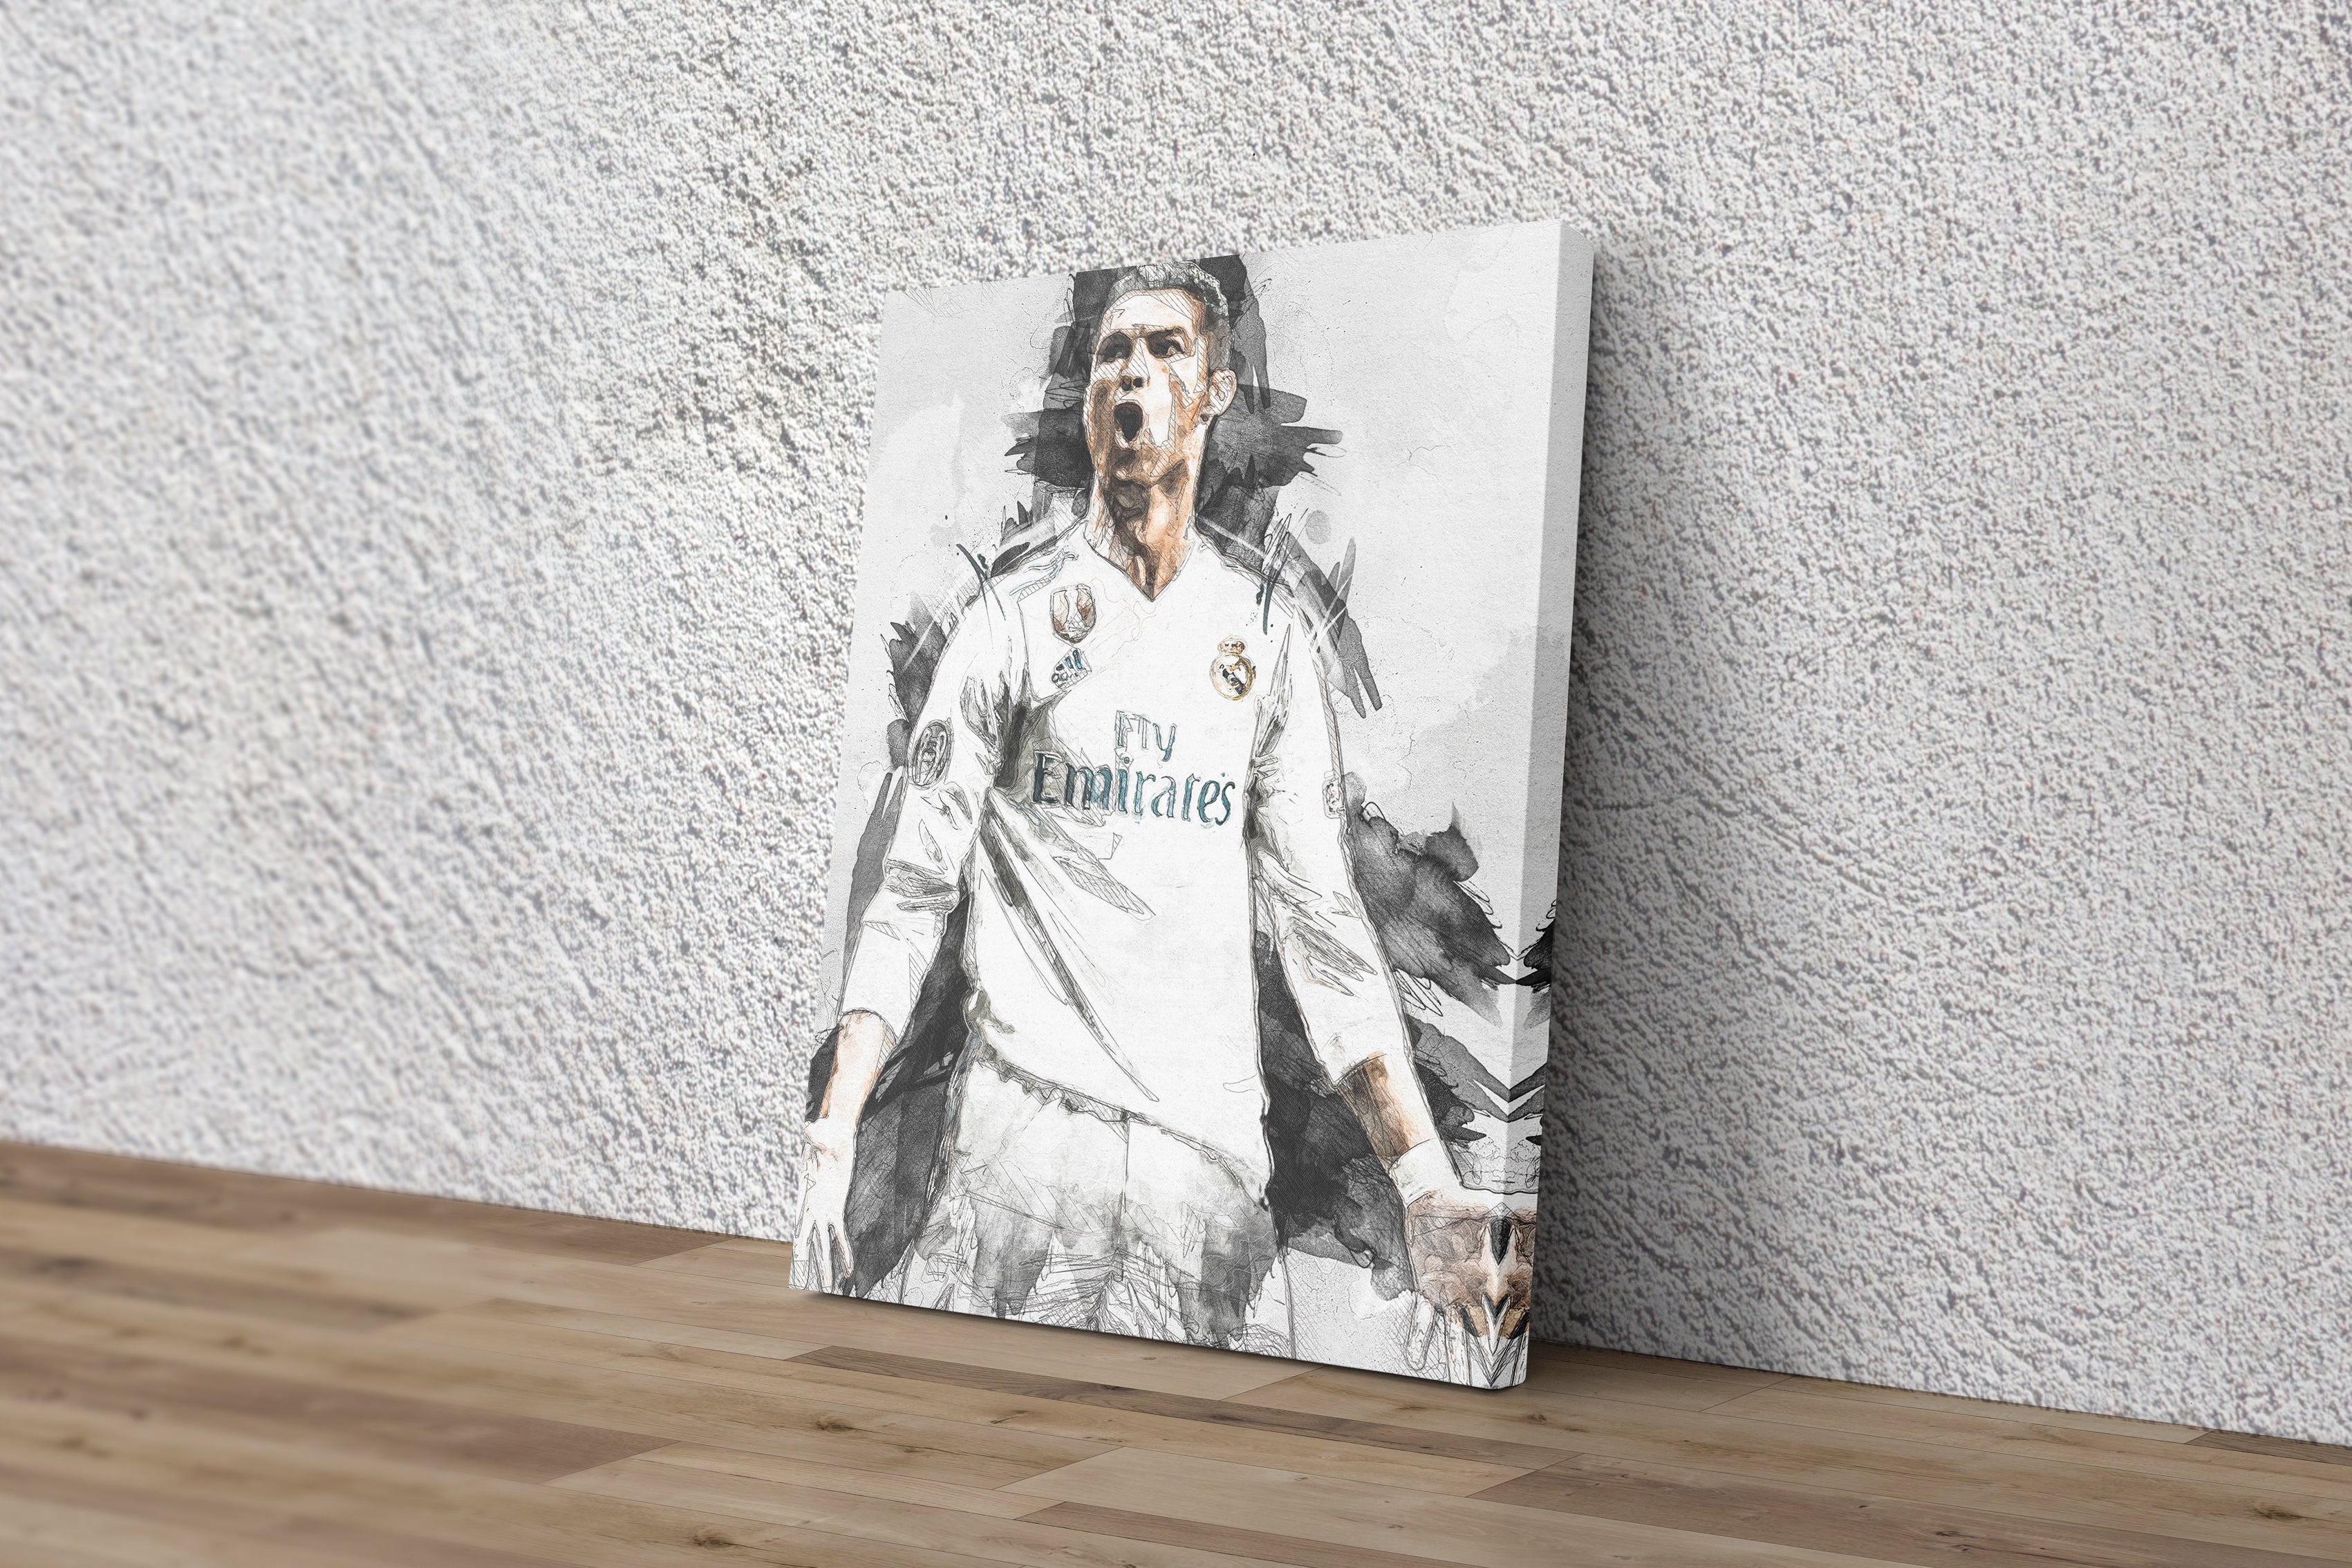 Real Madrid Posters 